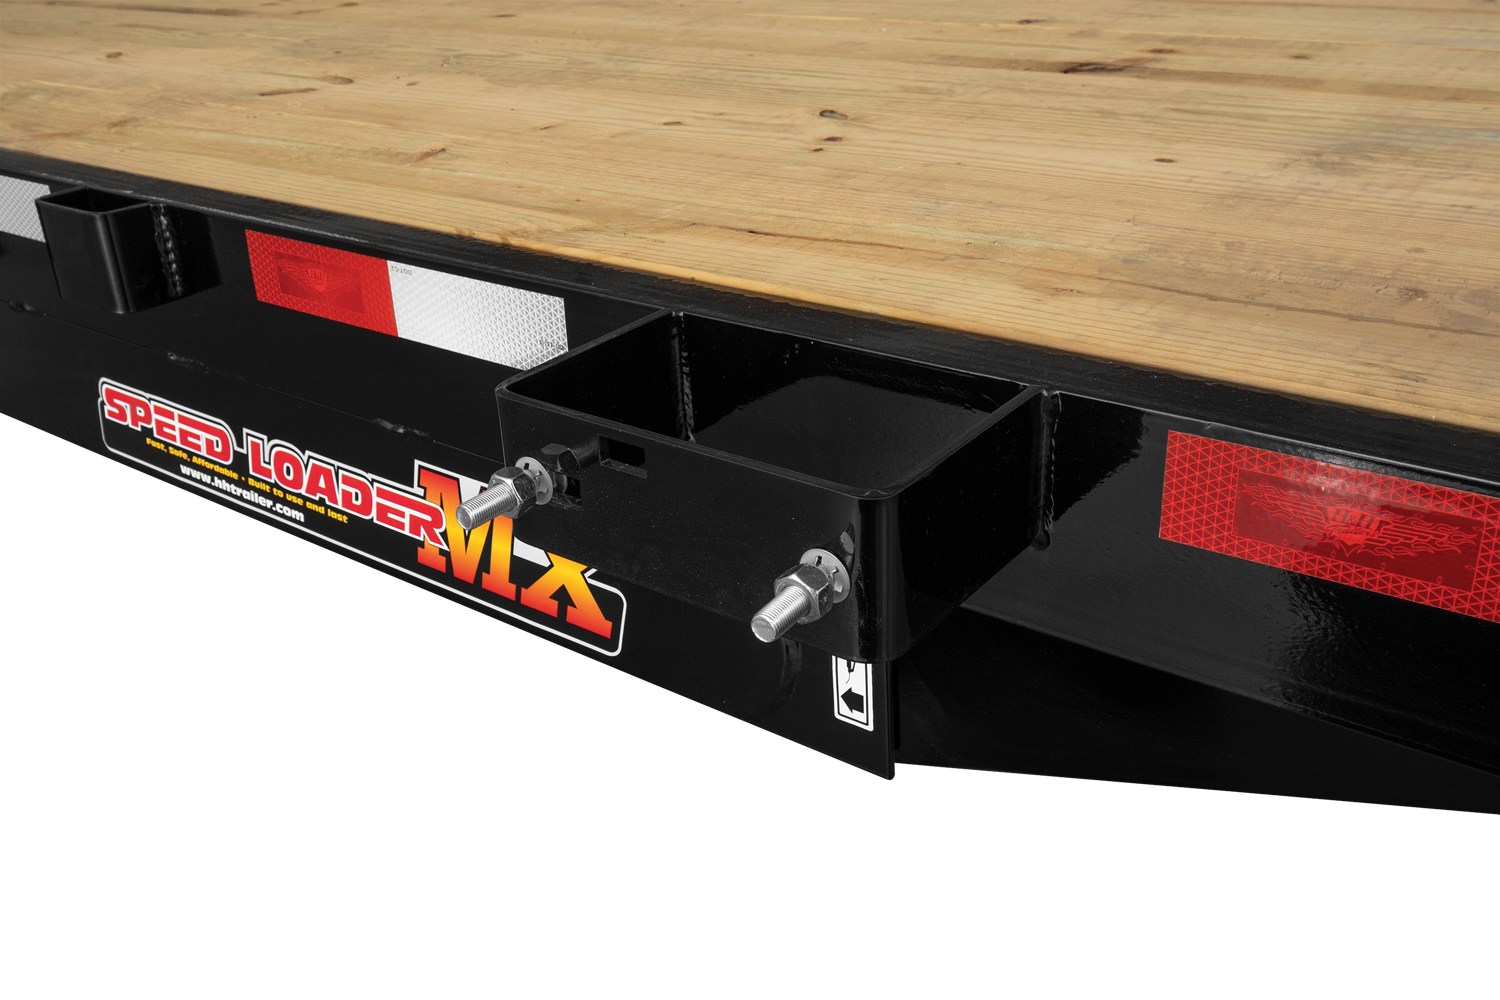 HH Trailer | Products | Trailers | Featured Image | HH_SpeedloaderMX_SpareTireMount